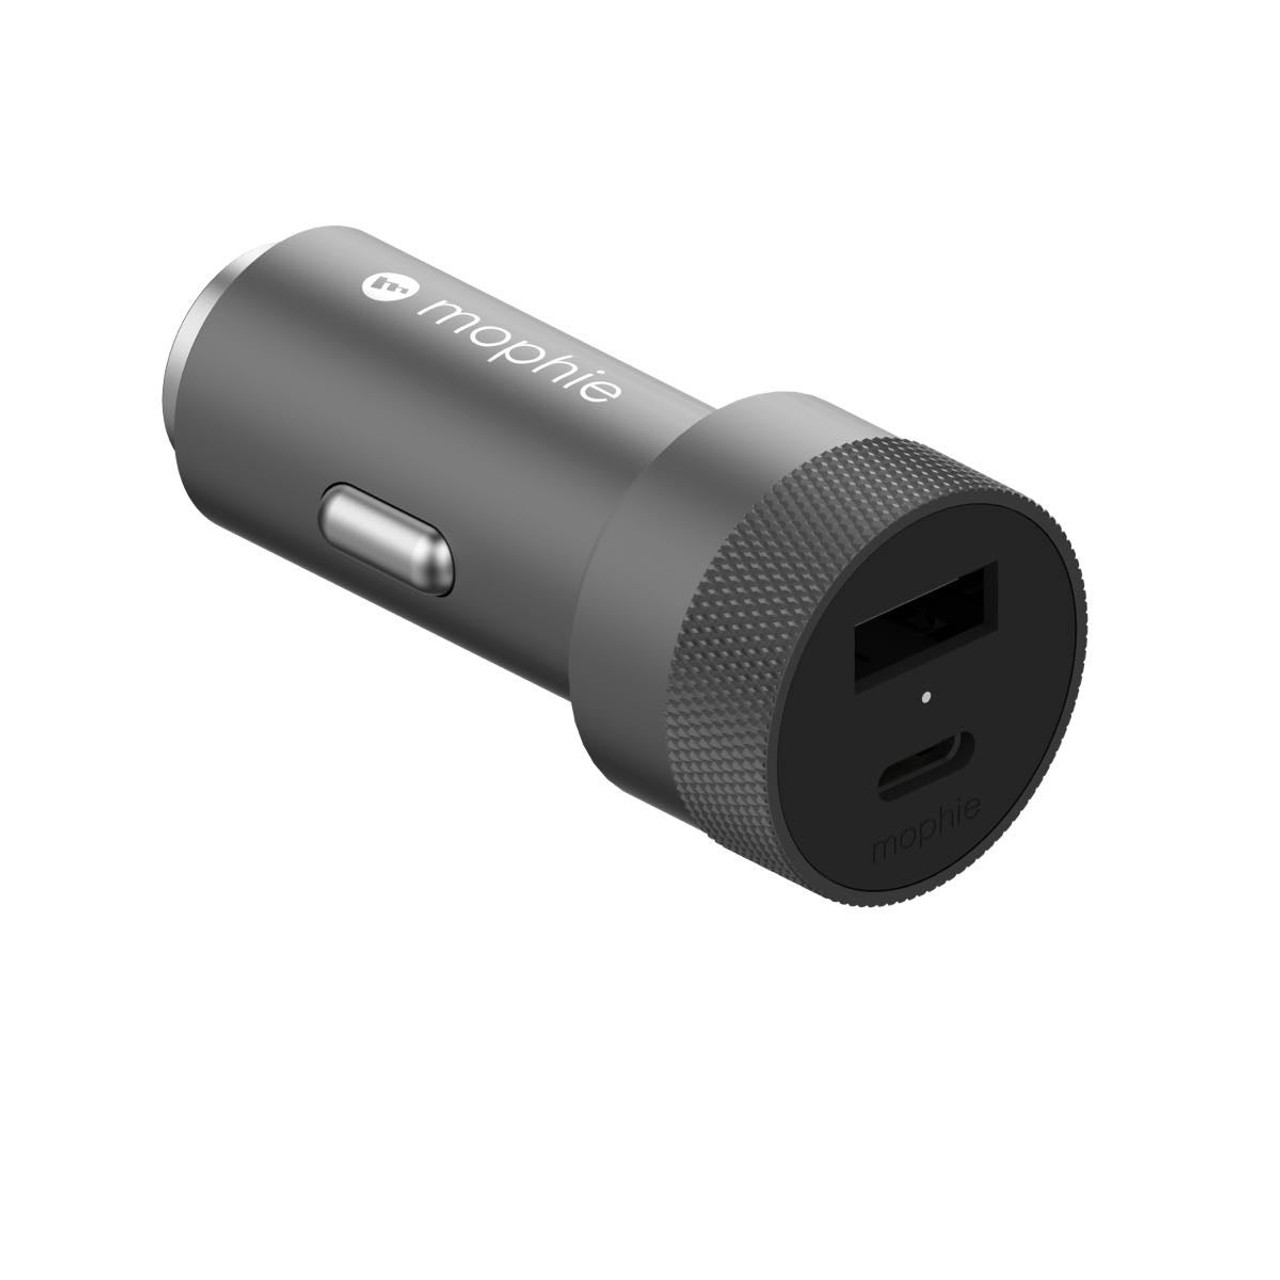 Car Charger with USB-C and USB-A